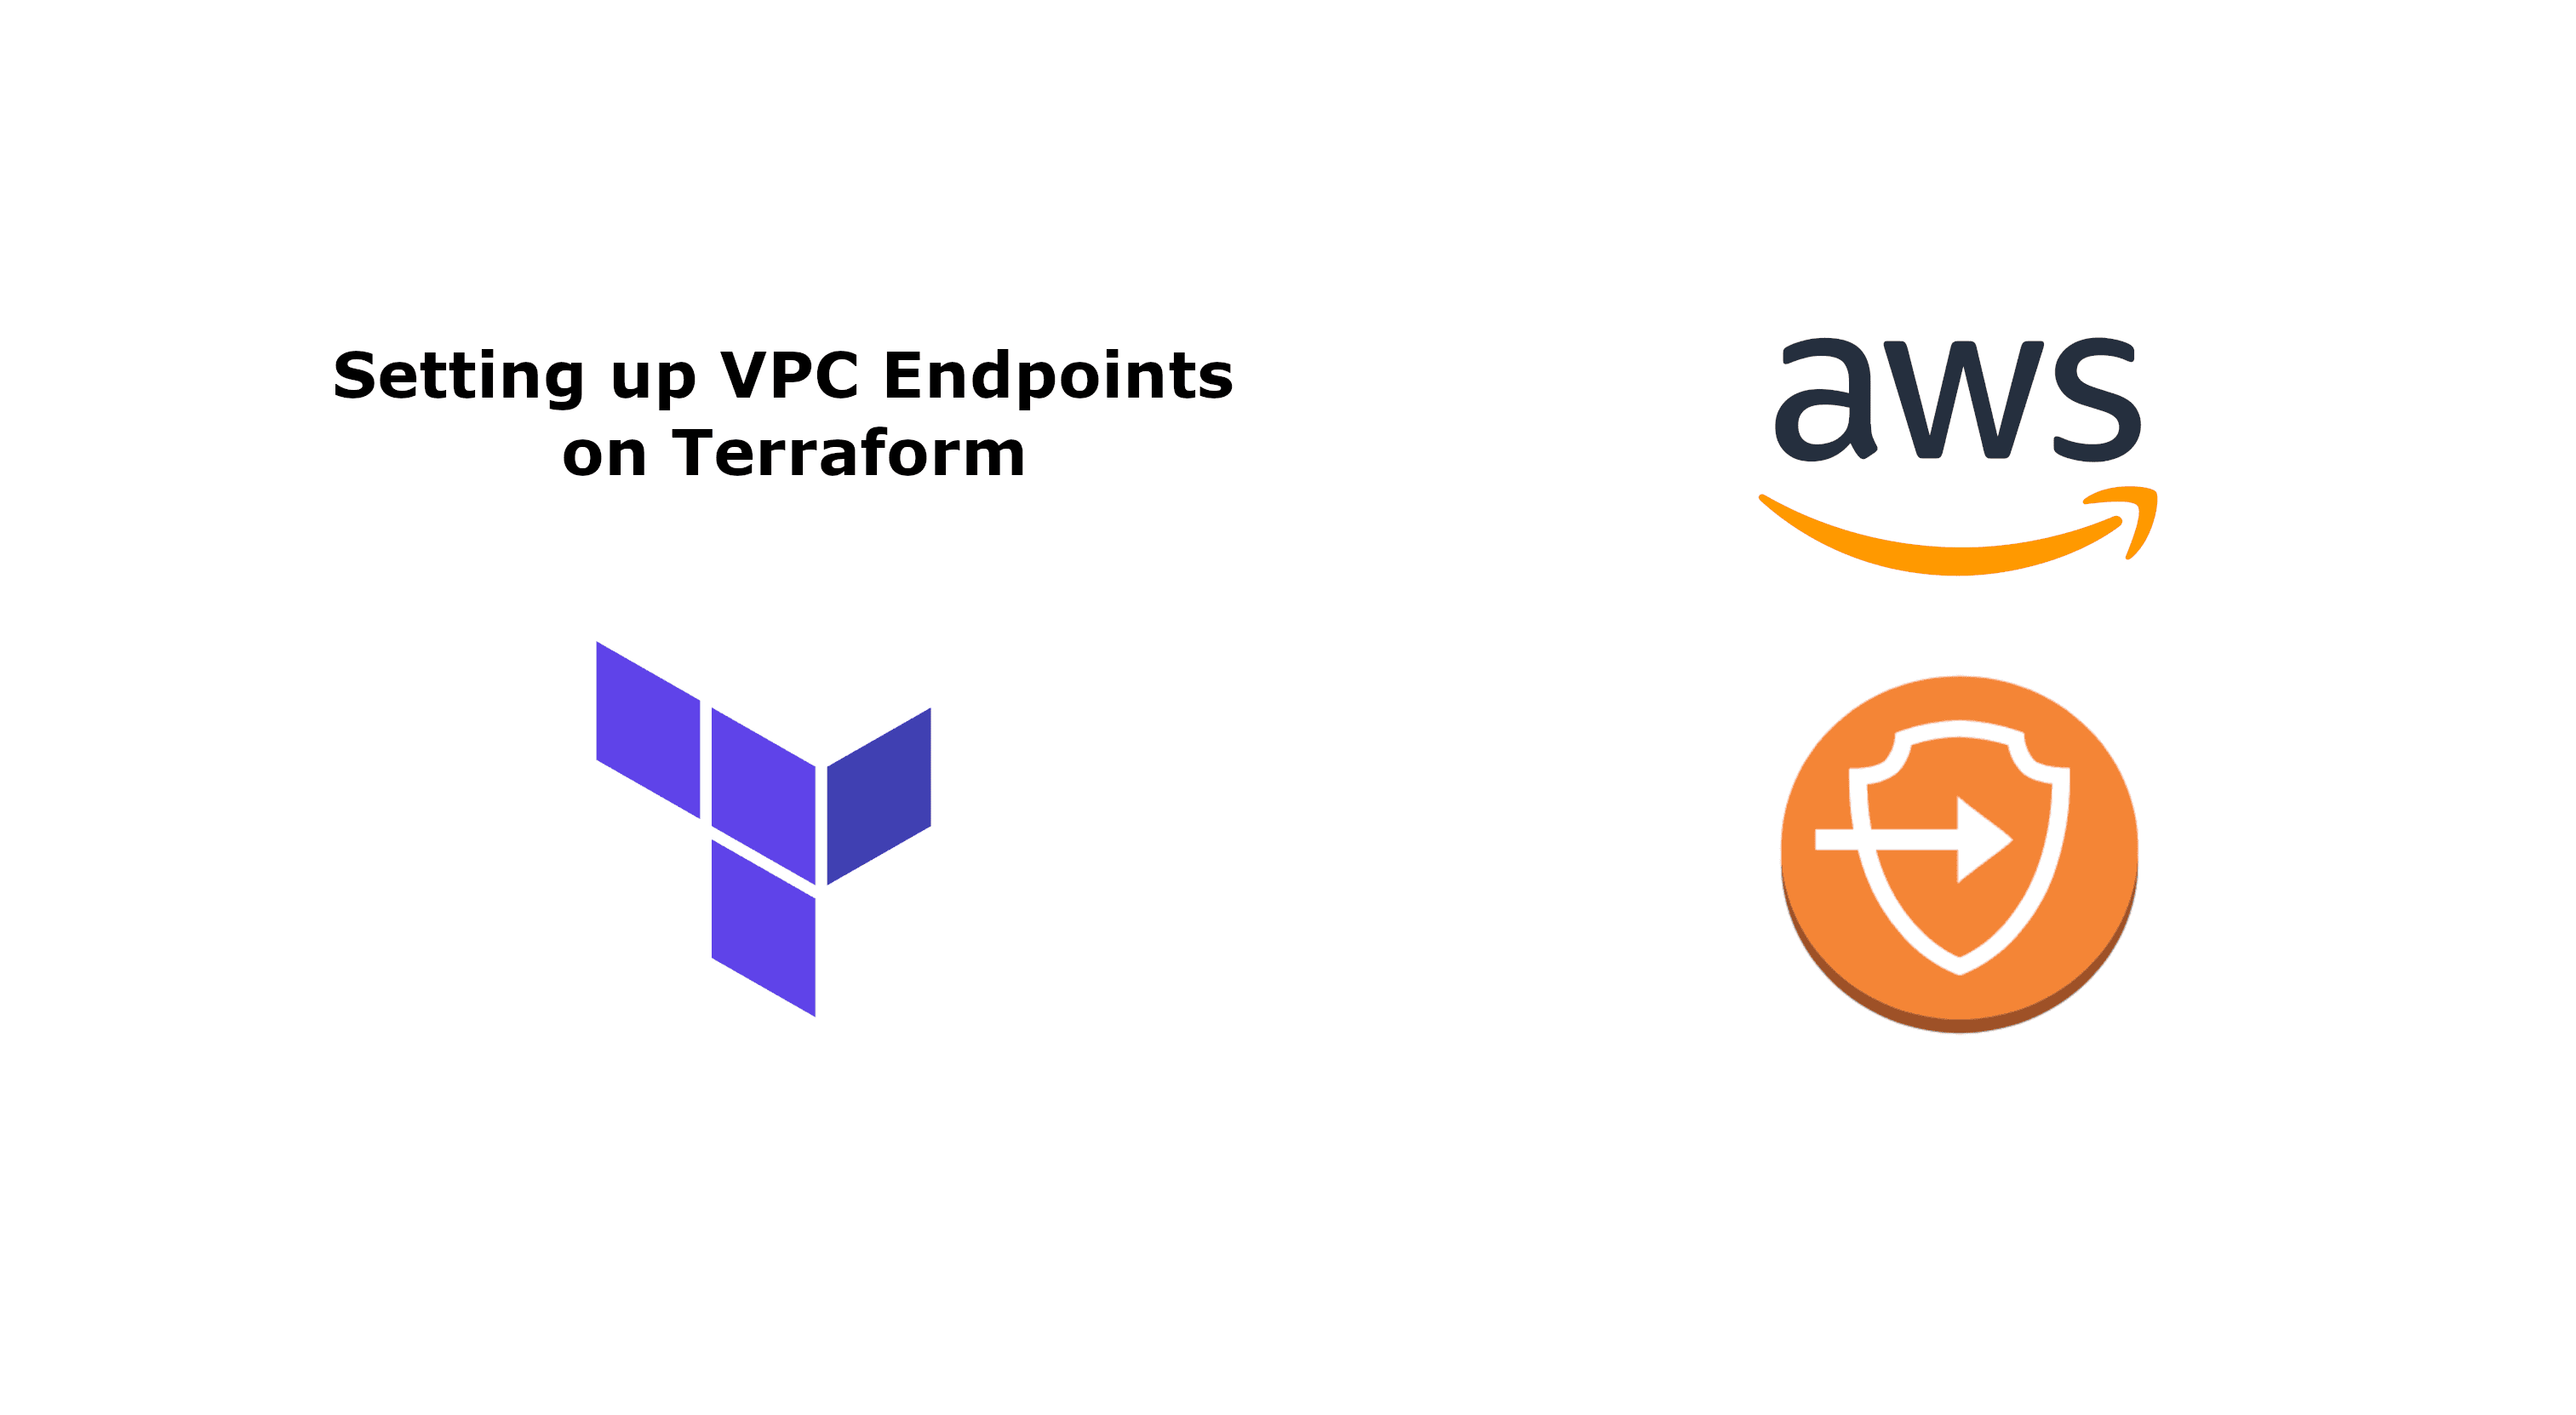 Setting up Gateway VPC Endpoints on Terraform to reduce your AWS bill